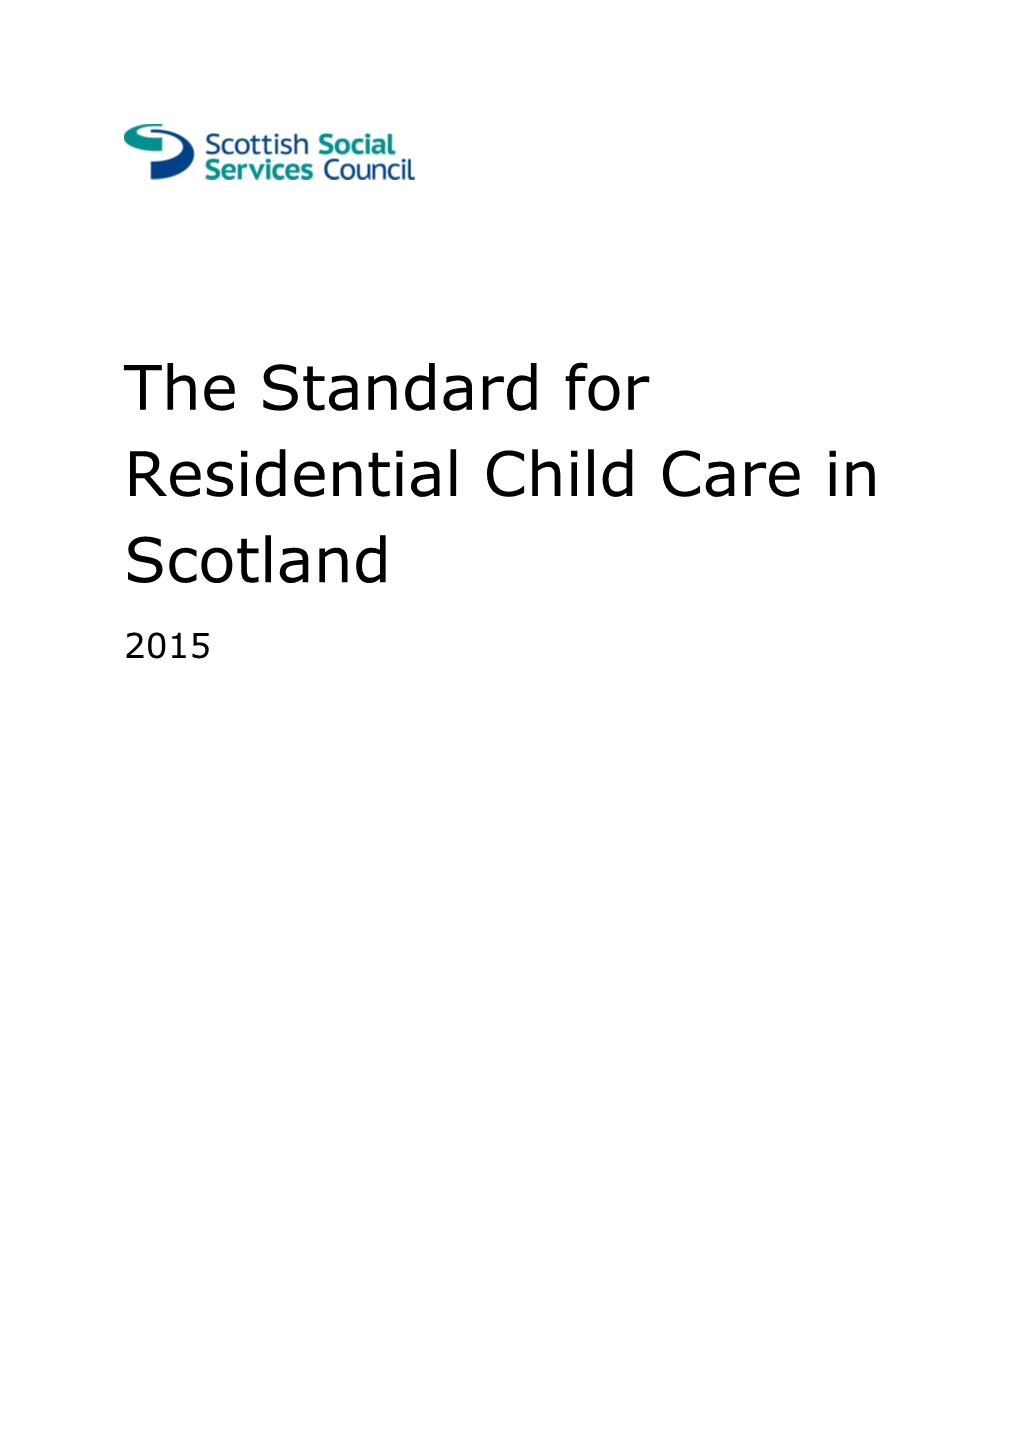 The Standard for Residential Child Care in Scotland 2015